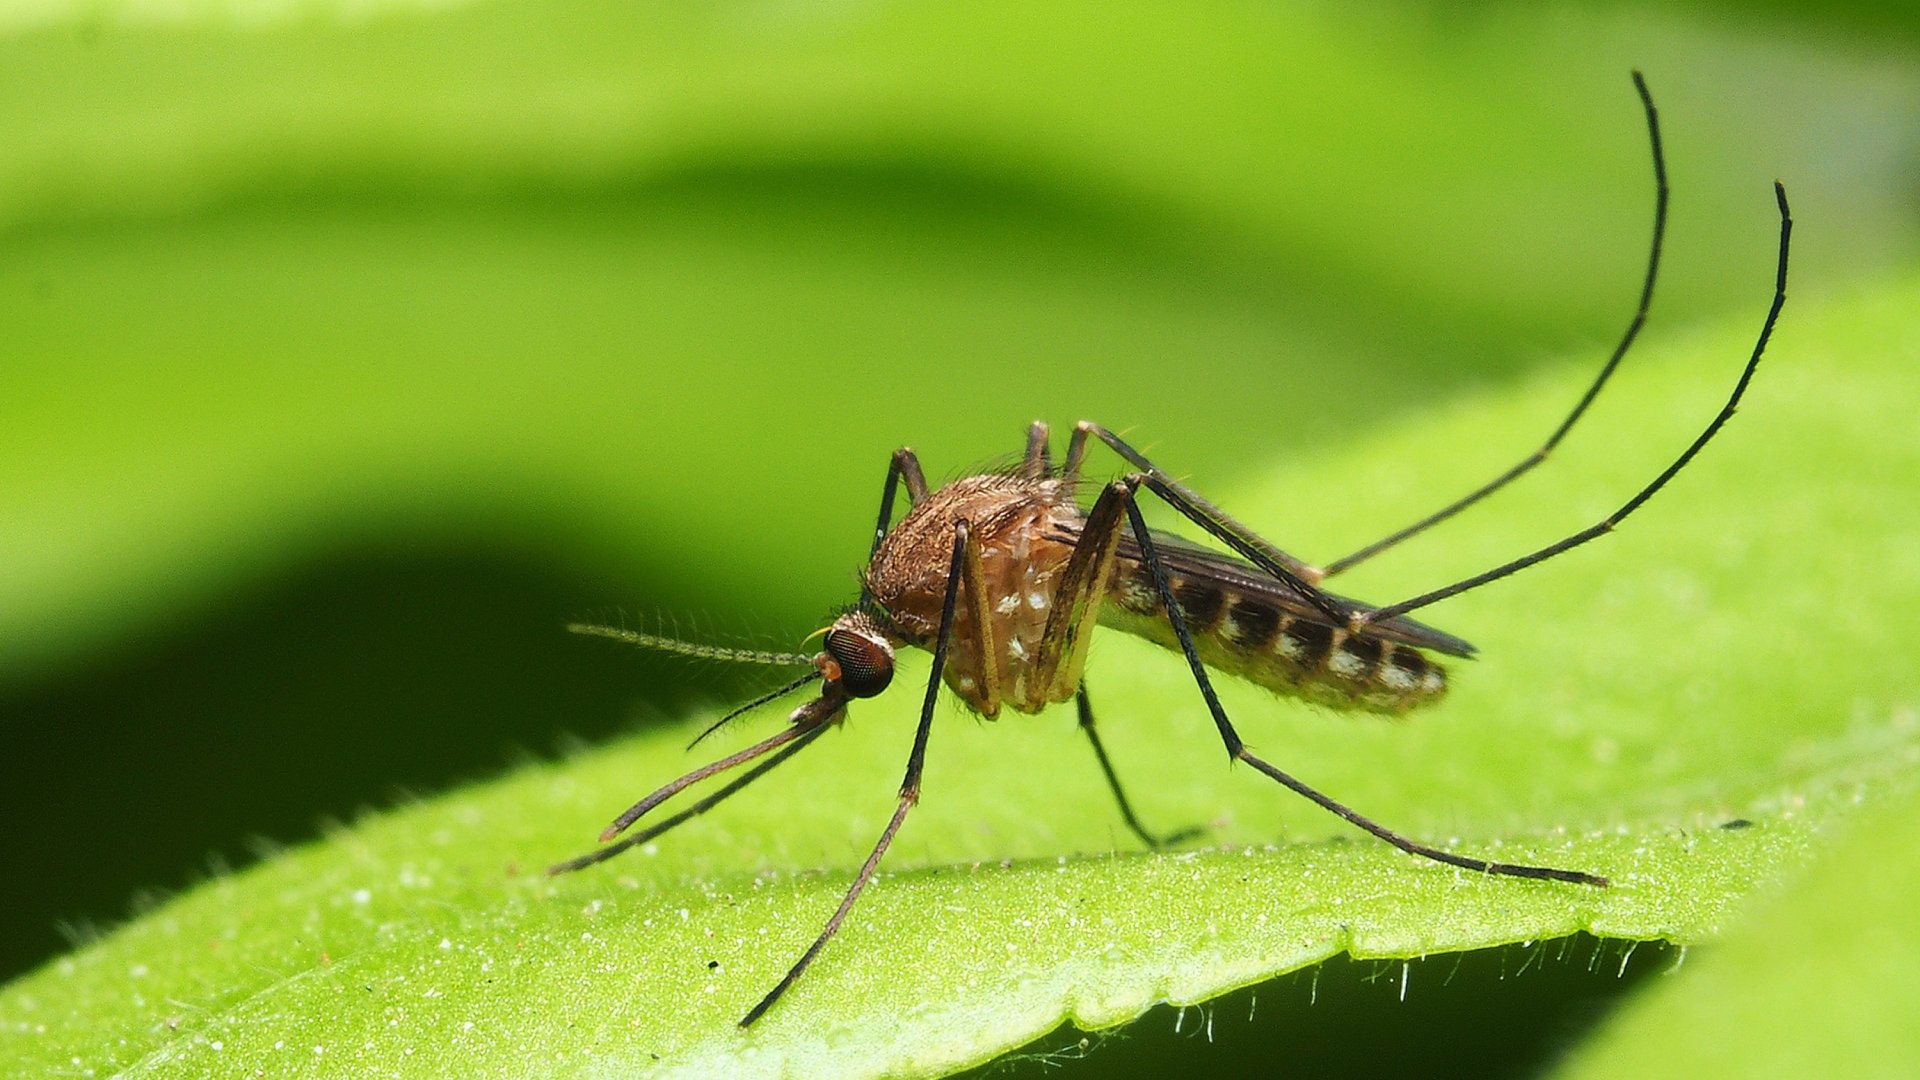 Mosquito Season Is Here - Hire Pros to Regain Control of Your Property